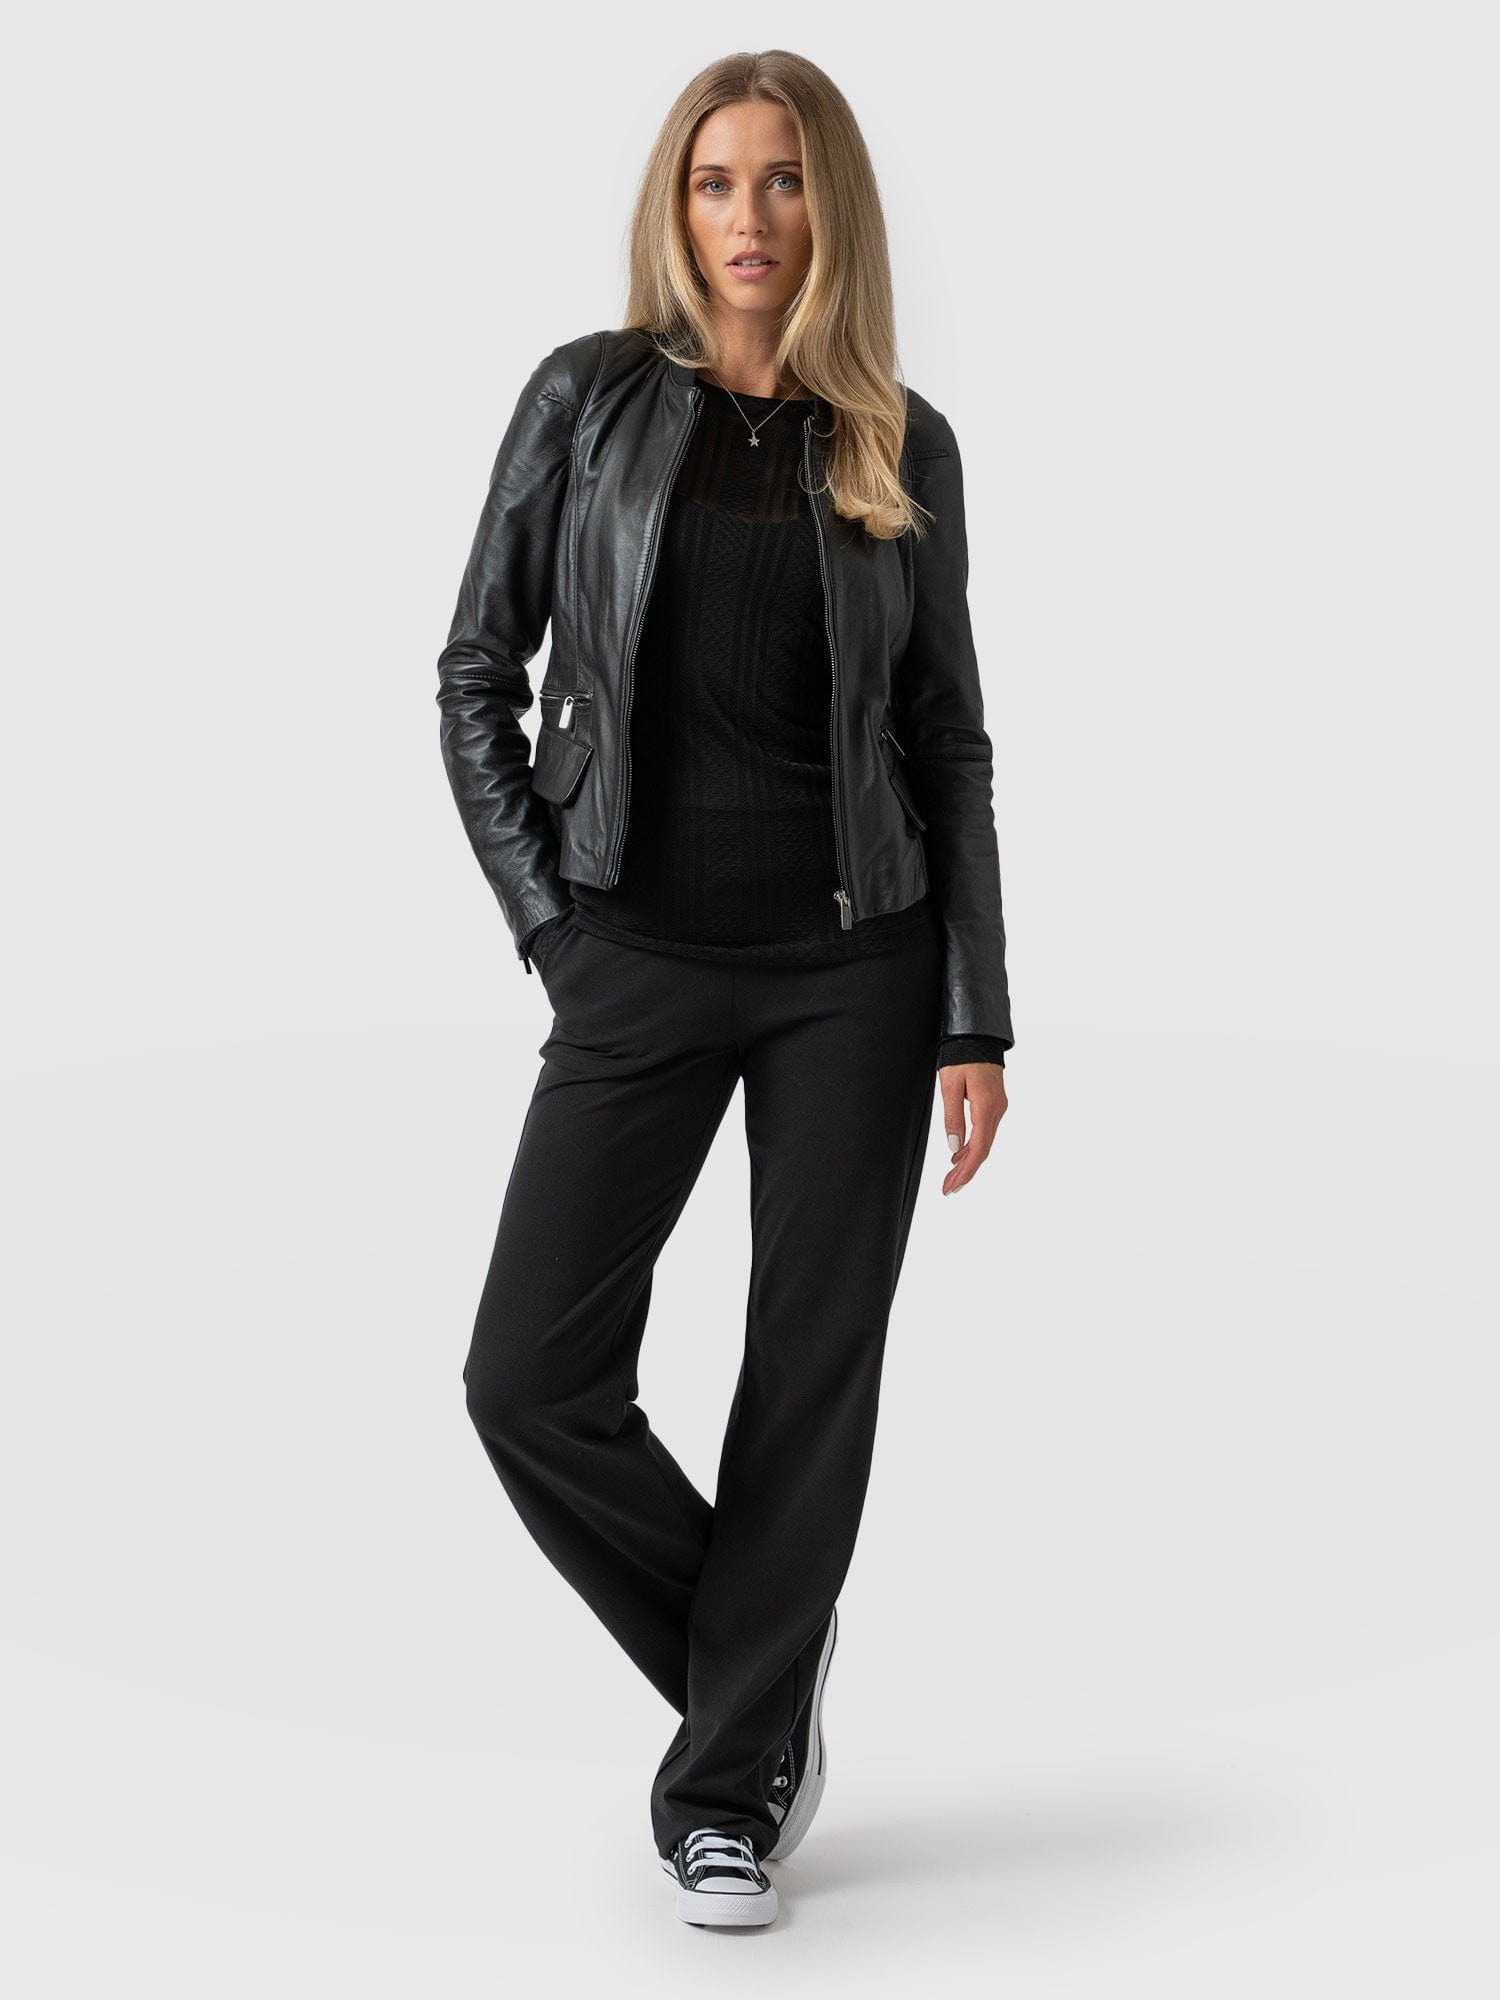 Buy Bamans Work Pants for Women Yoga Dress Pants Straight Leg Stretch Work  Pant with Pockets, Black, Small at Amazon.in